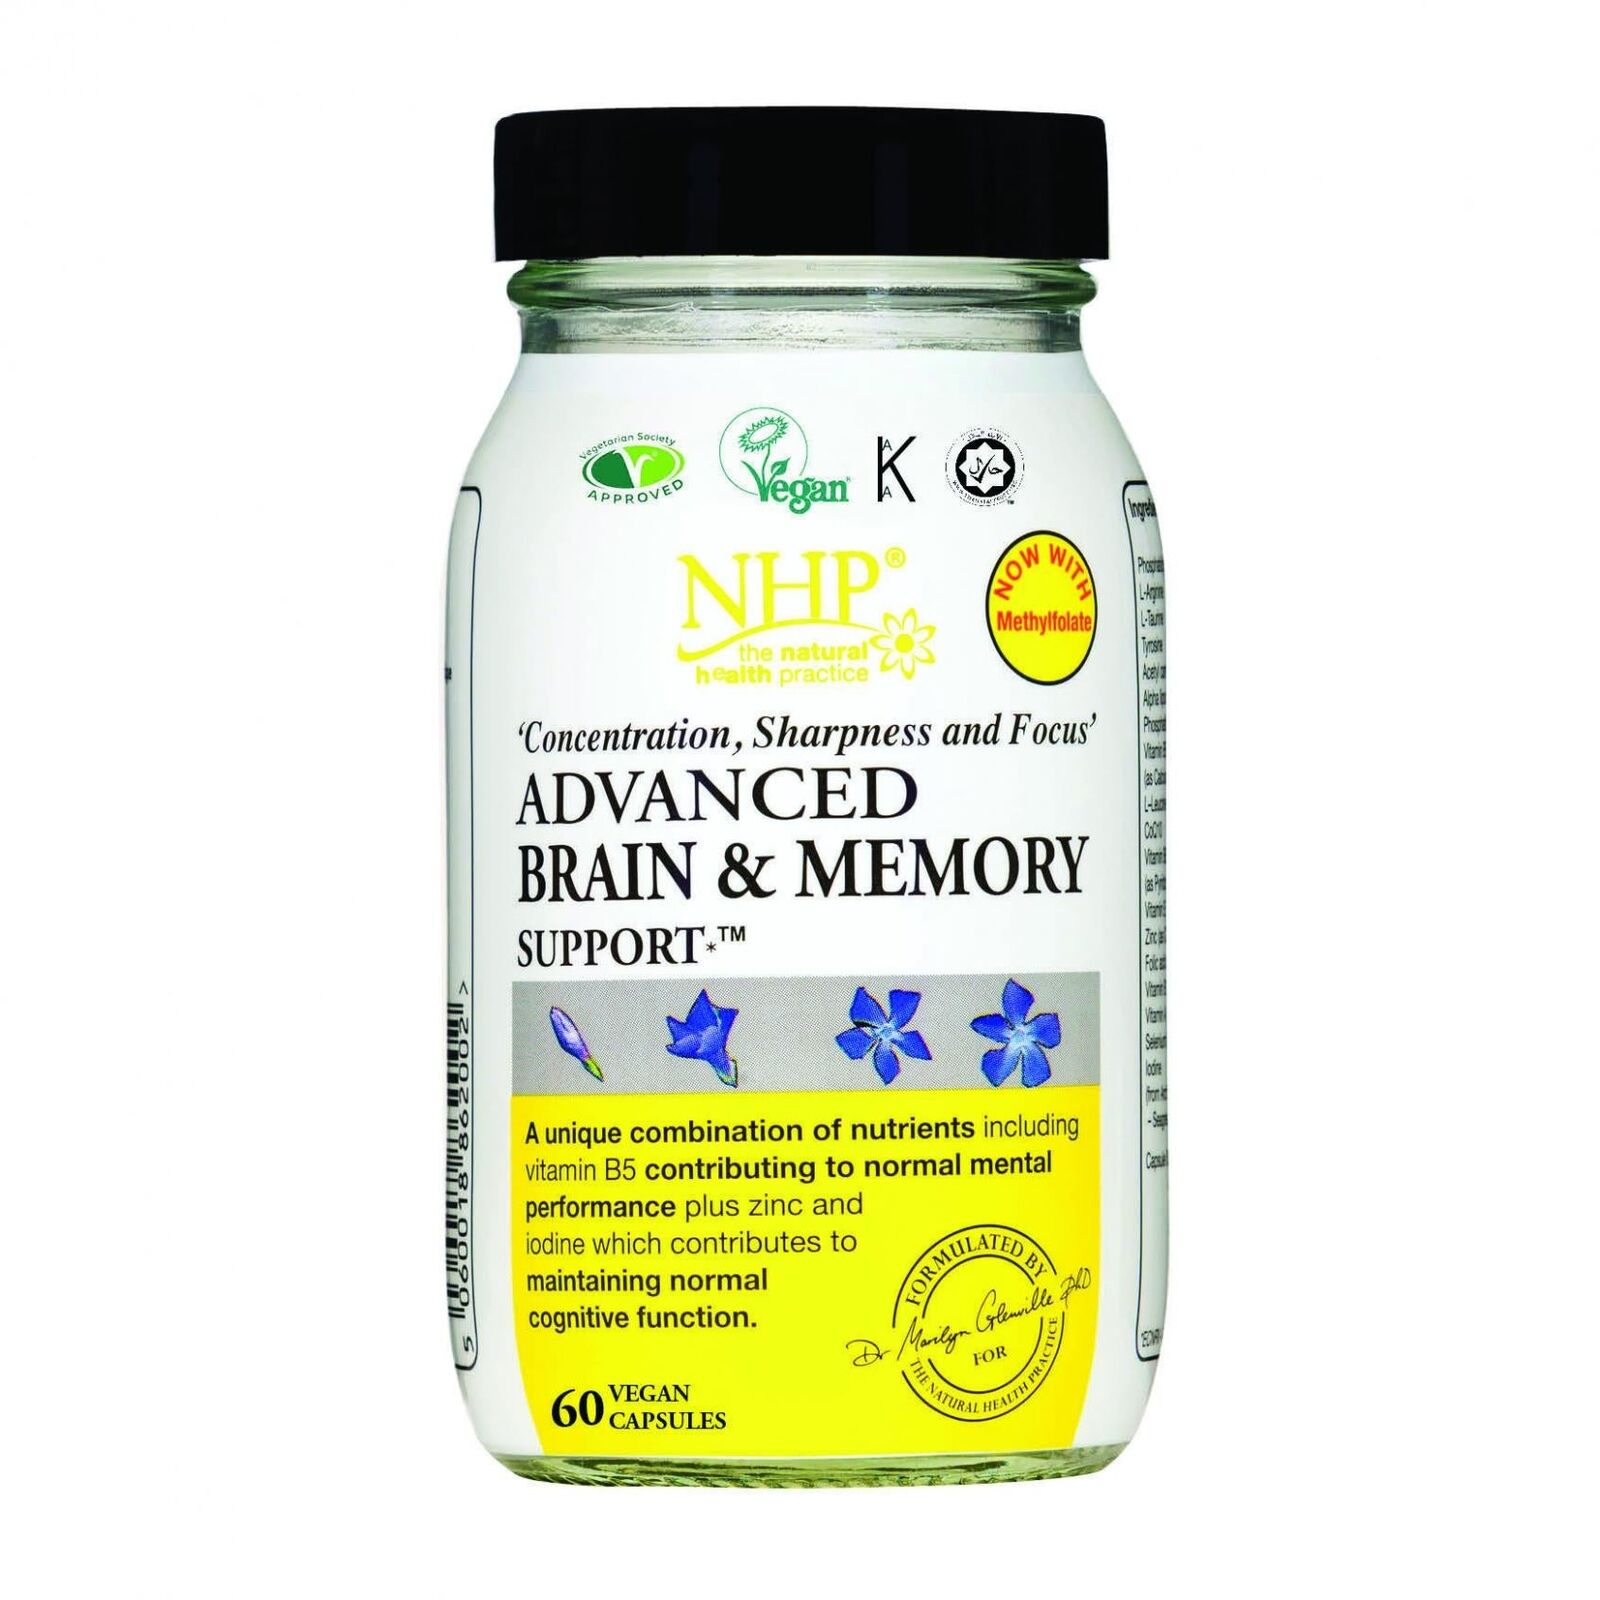 NHP Advanced Brain and Memory Supplement